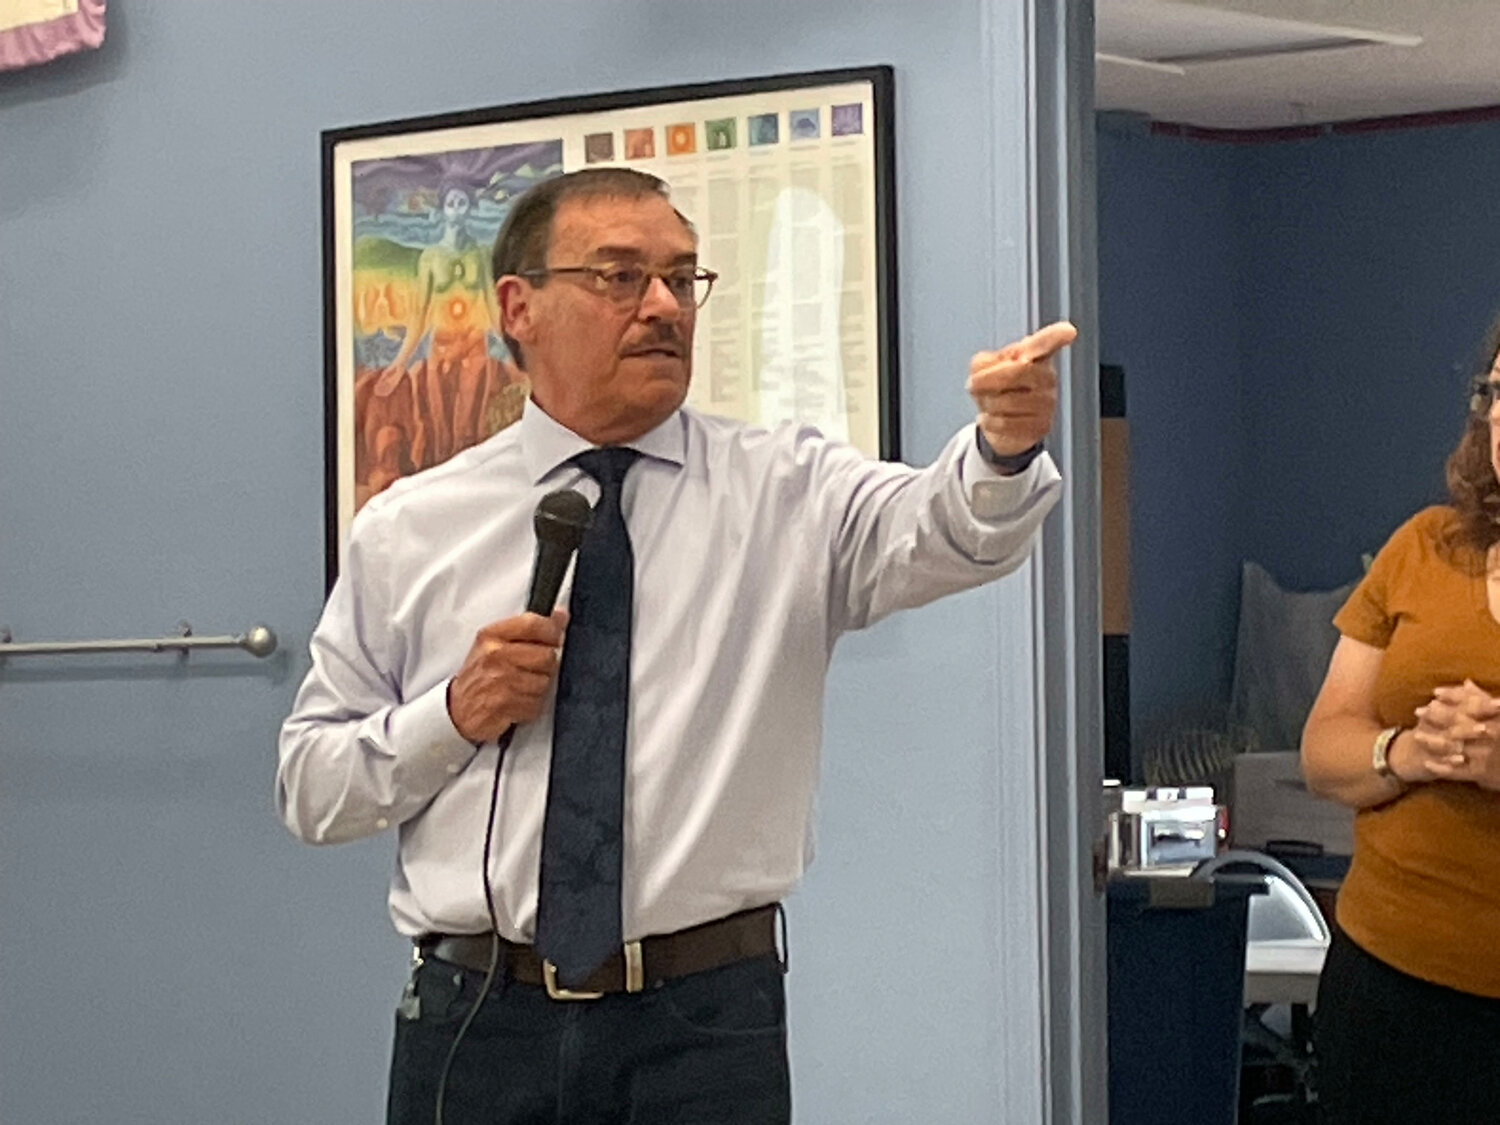 Deputy County Manager John Garcia calls on someone with a question at a May 17 town hall meeting on a proposed ordinance to ban the feeding of wild horses. (T.S. Last/Sandoval Signpost)